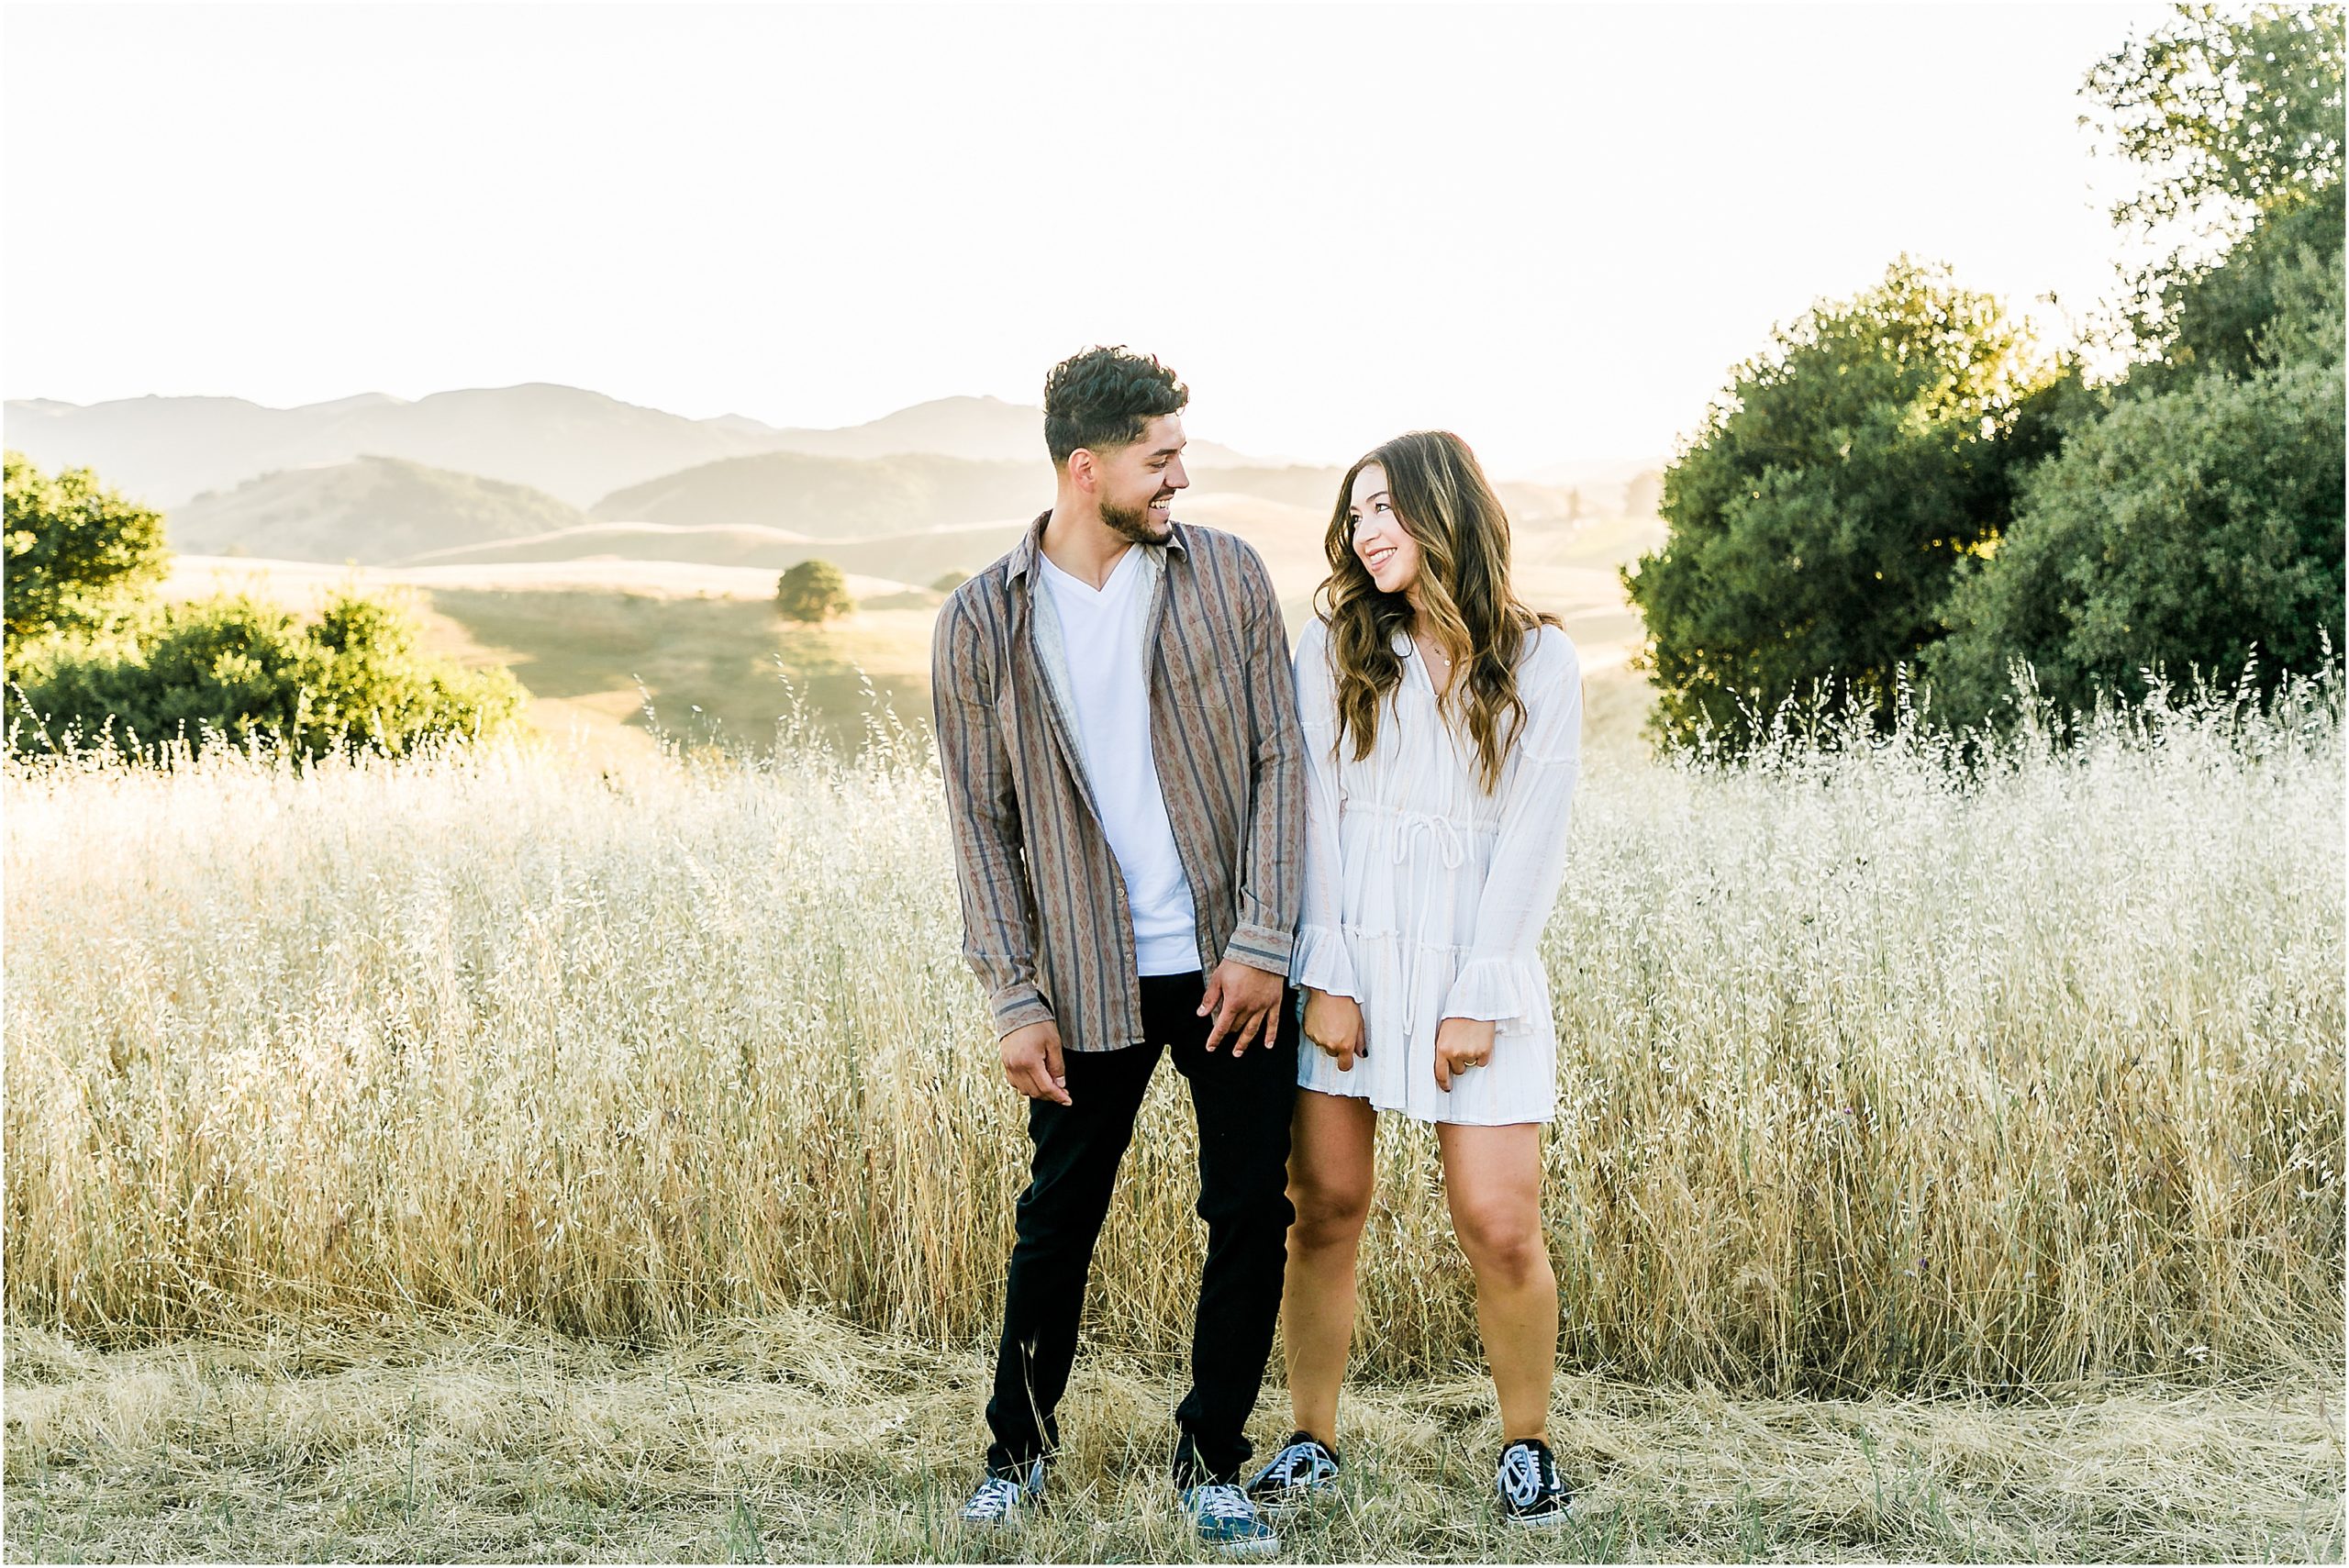 Amy Jordan Photography at a couples session at Helen Putnam Regional park